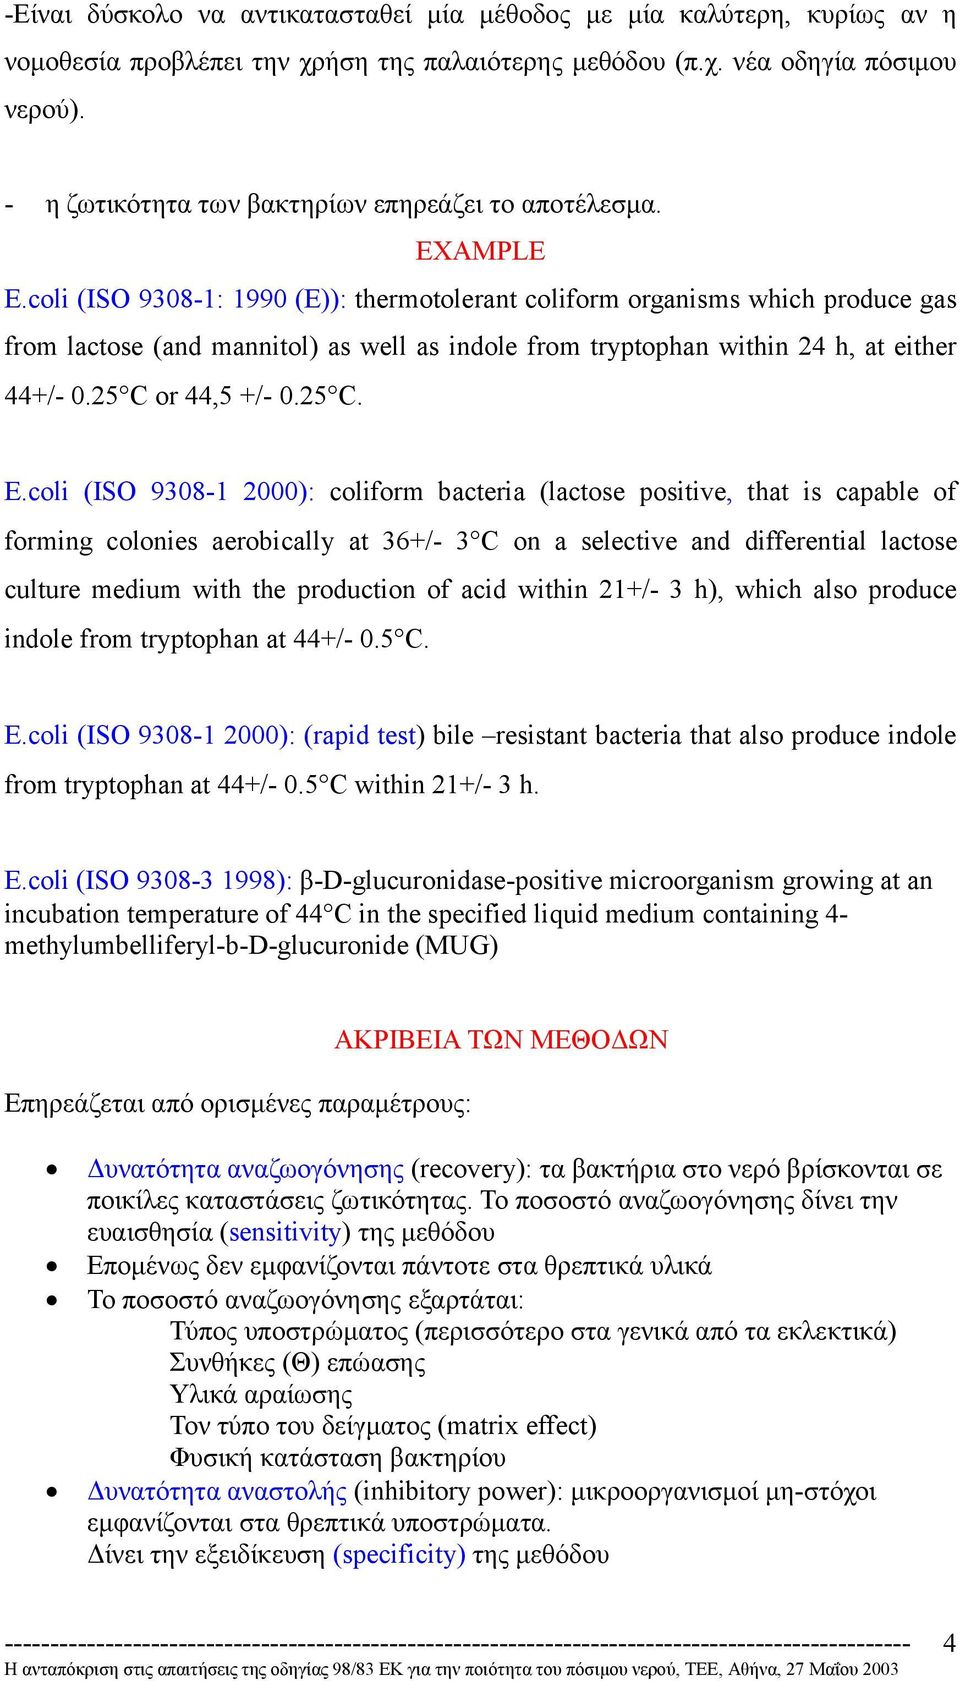 EXAMPLE (ISO 9308-1: 1990 (E)): thermotolerant coliform organisms which produce gas from lactose (and mannitol) as well as indole from tryptophan within 24 h, at either 44+/- 0.25 C or 44,5 +/- 0.